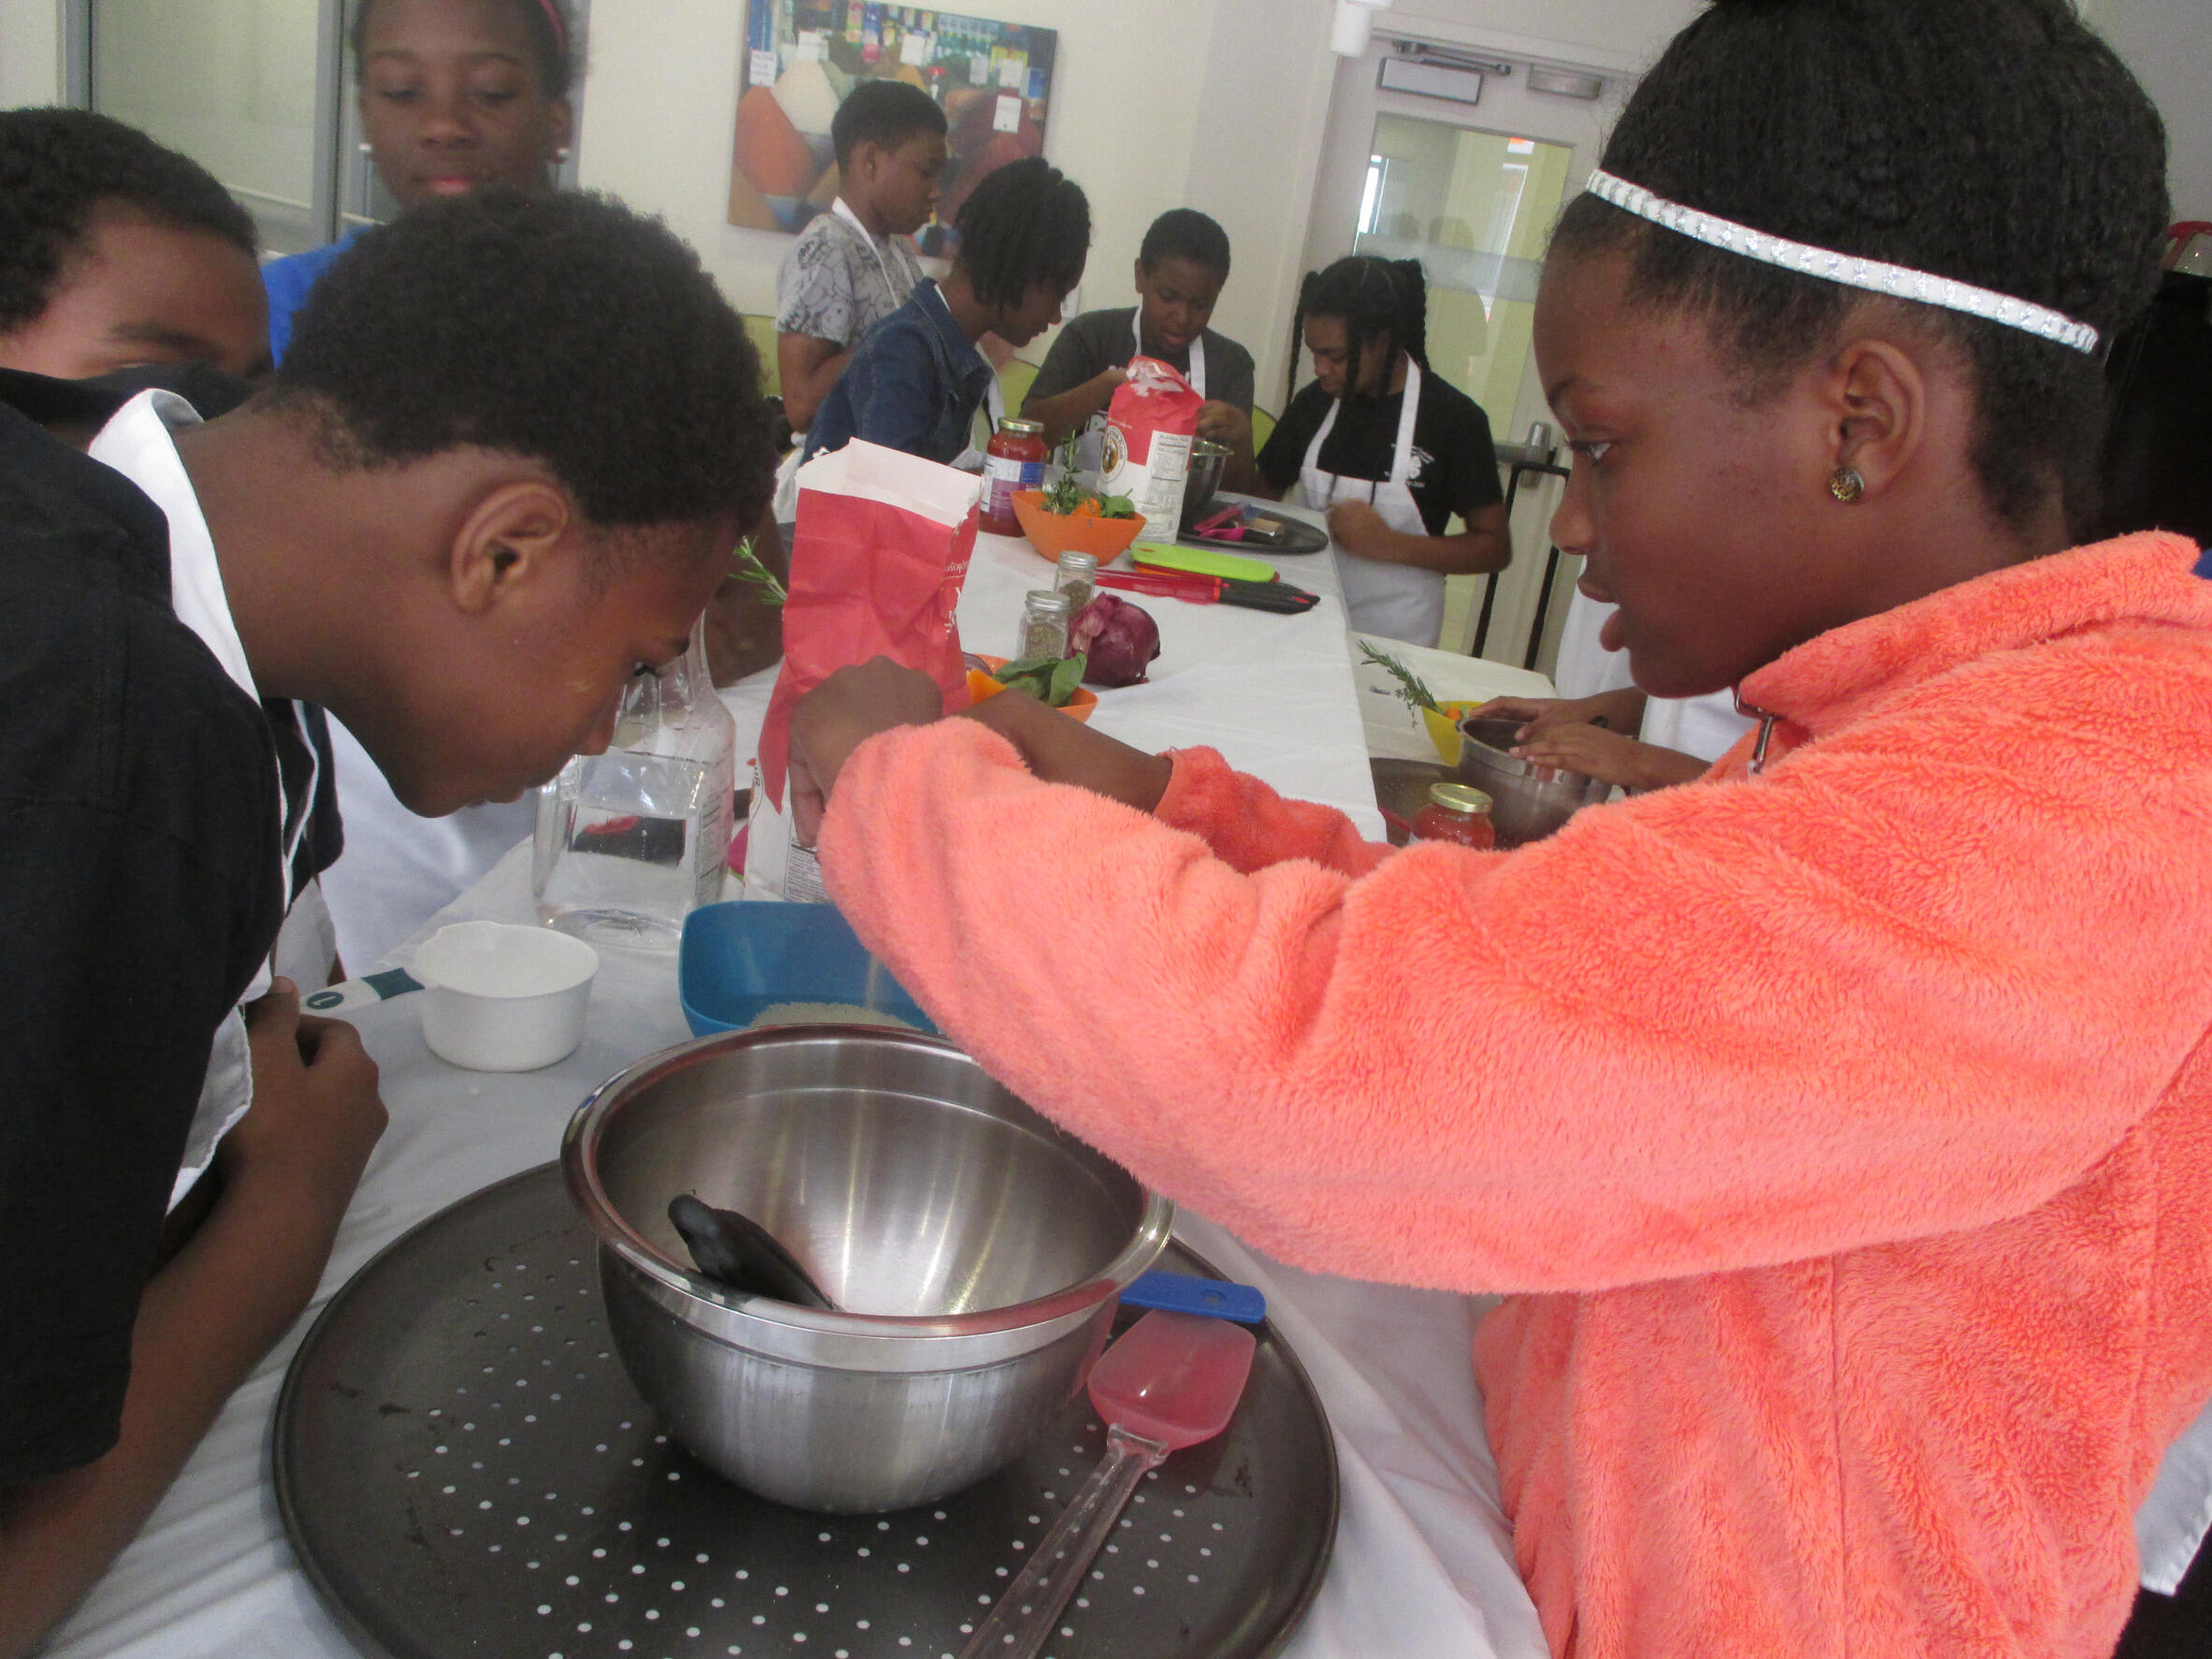 Two youth looking into a mixing bowl, the girl on the right is cracking an egg over it. 